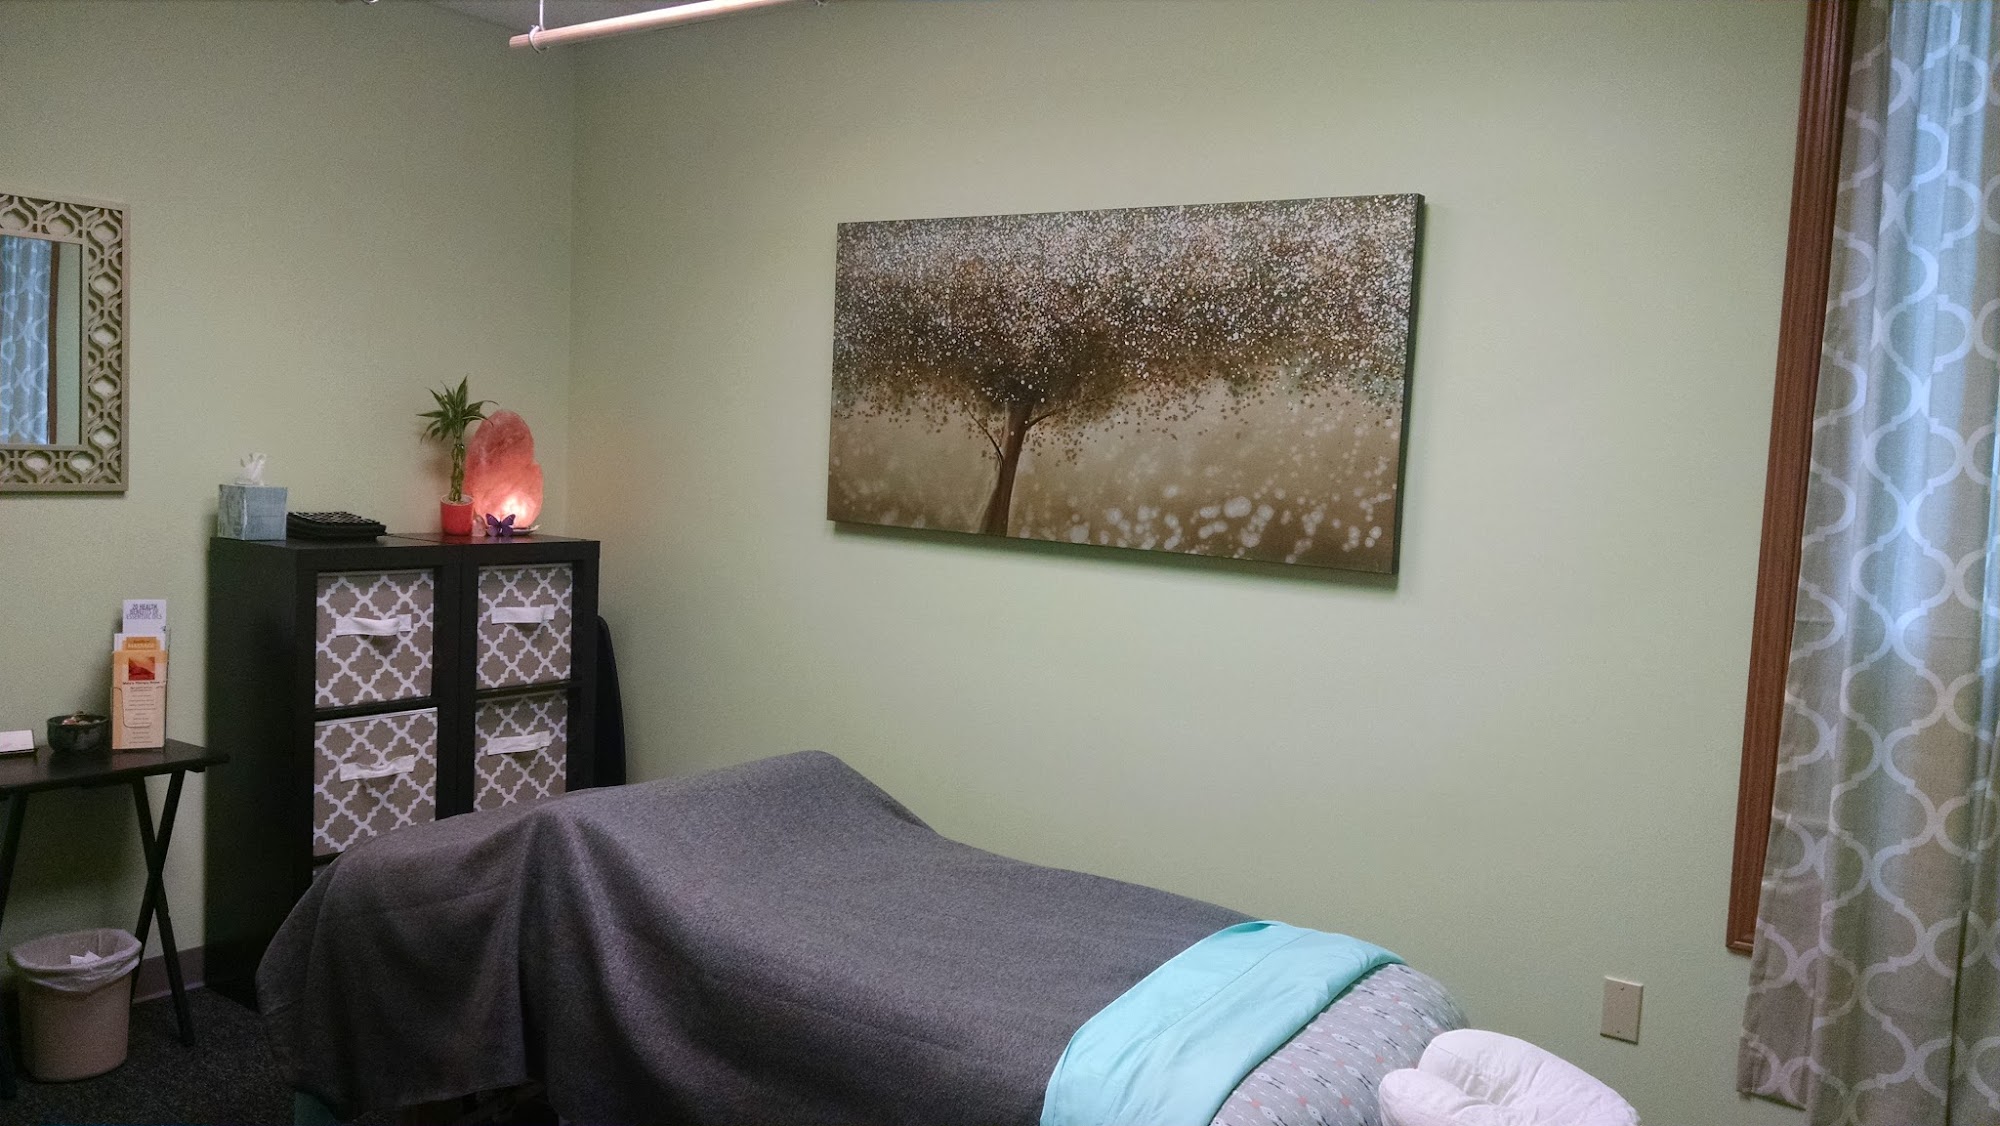 Mary's Therapy Room 108 S Port Crescent St, Bad Axe Michigan 48413